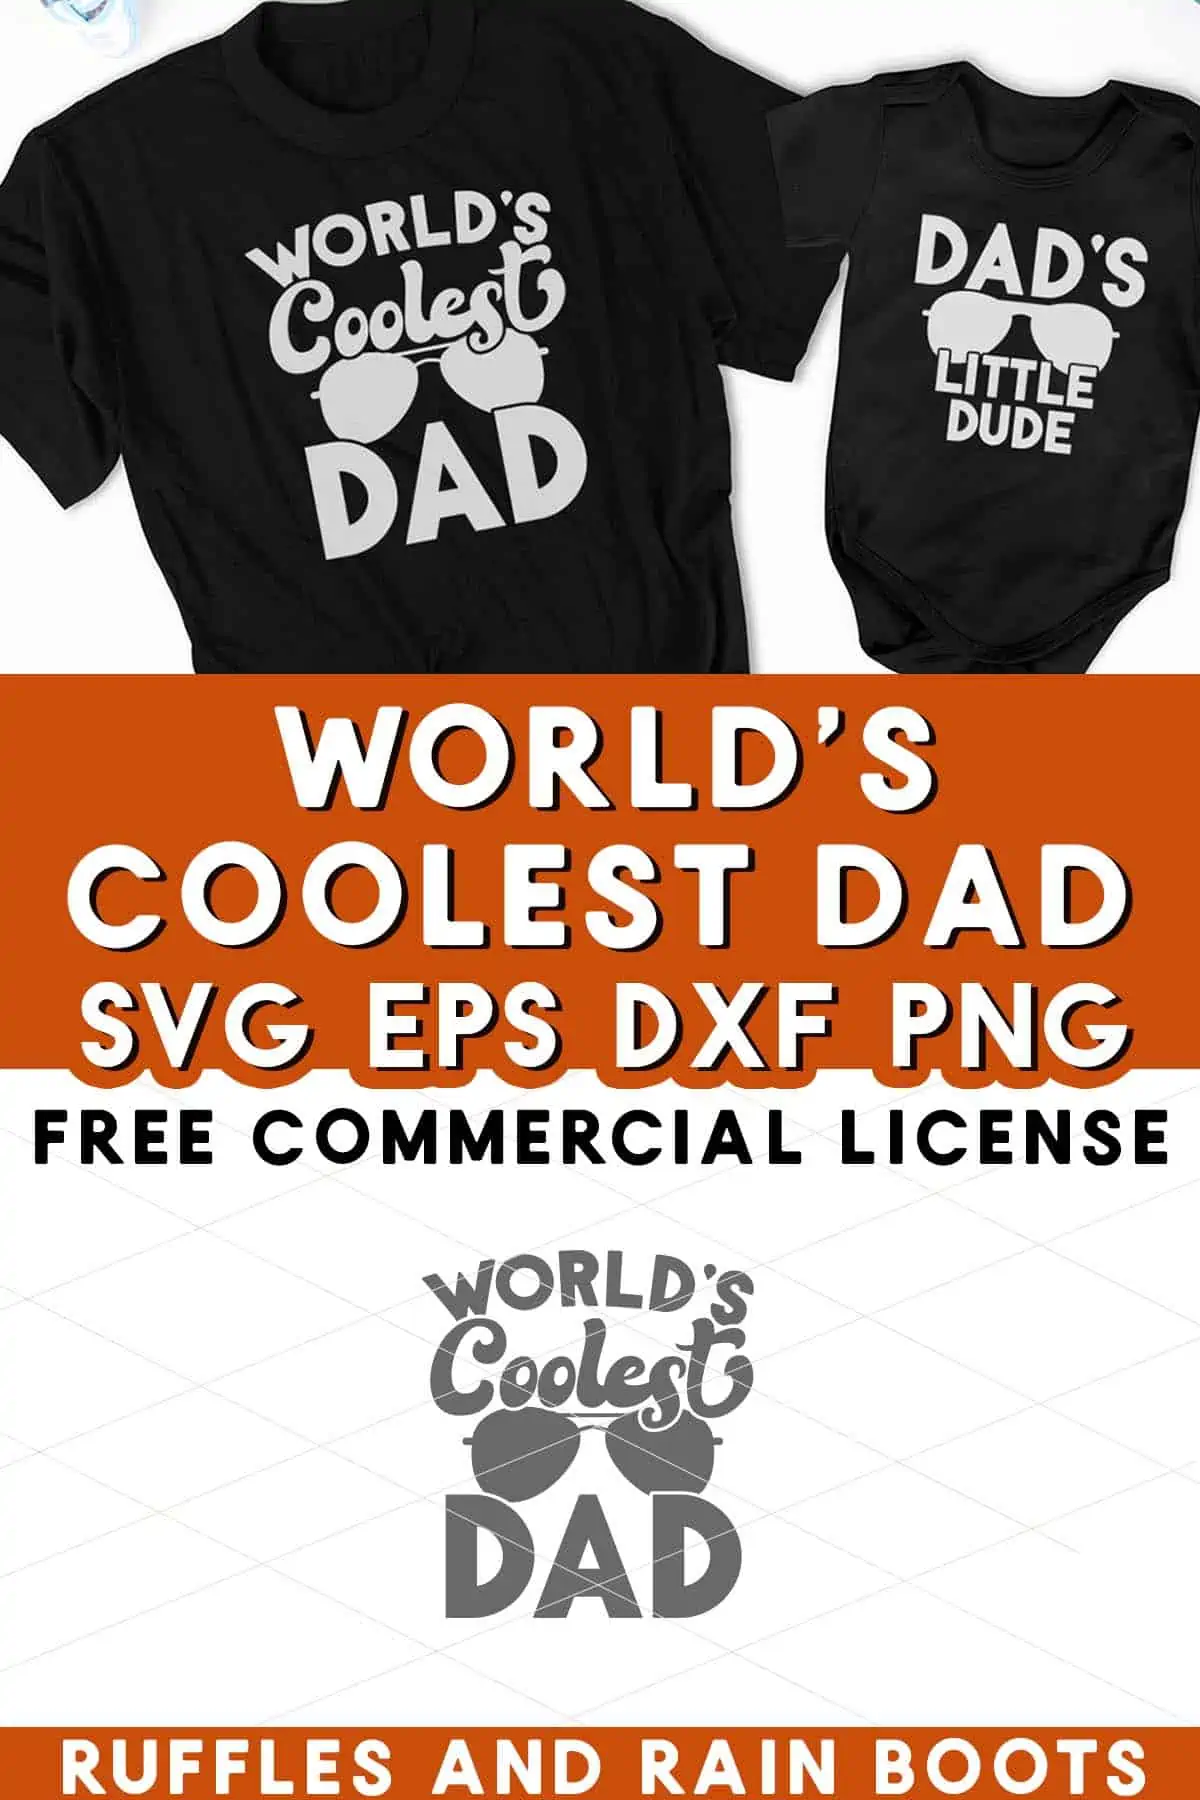 Vertical stacked image showing black t shirt and body suit on a white background with text which reads World's Coolest Dad SVG with free commercial license.